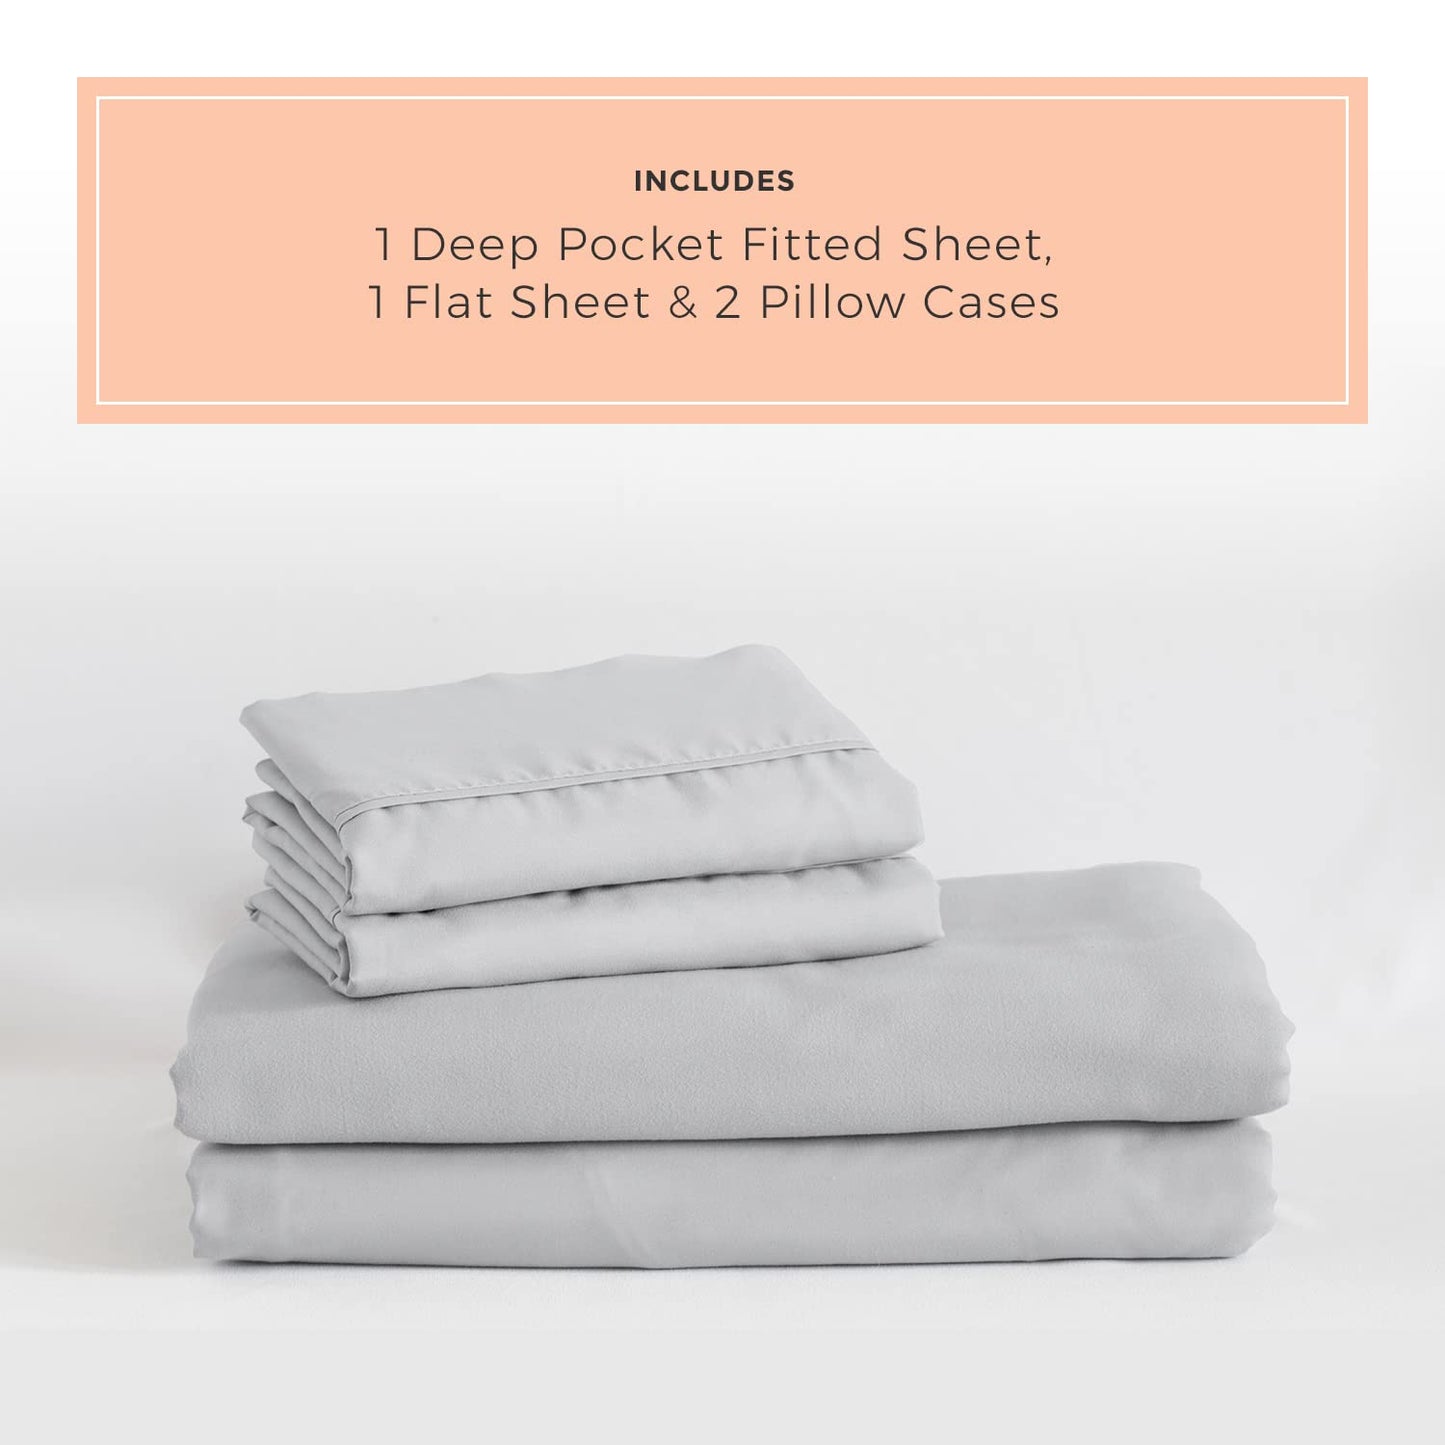 PeachSkinSheets Brushed Silver Sheet Set - 1500tc Level of Softness - Extra Soft Cooling Sheets for Hot Sleepers and Night Sweats - XL Full Size